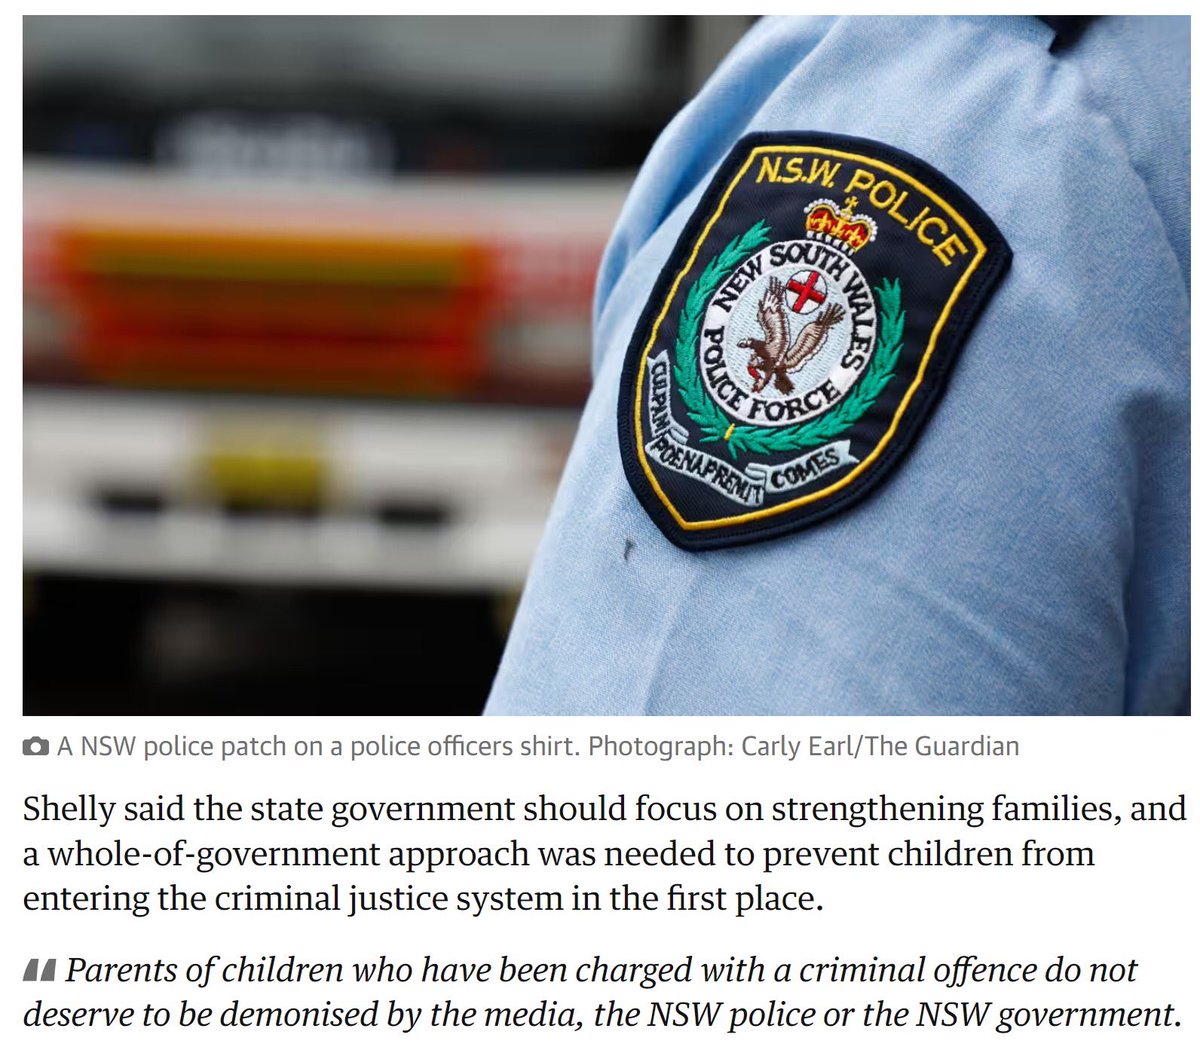 NSW Police are lobbying the Gov to introduce laws that would create criminal offences for the parents of minors found with weapons. This is a terrible idea & yet another way to weaken social cohesion & destroy families. Who thinks this stuff up? nswccl.org.au/nsw_police_sho… #nswpol